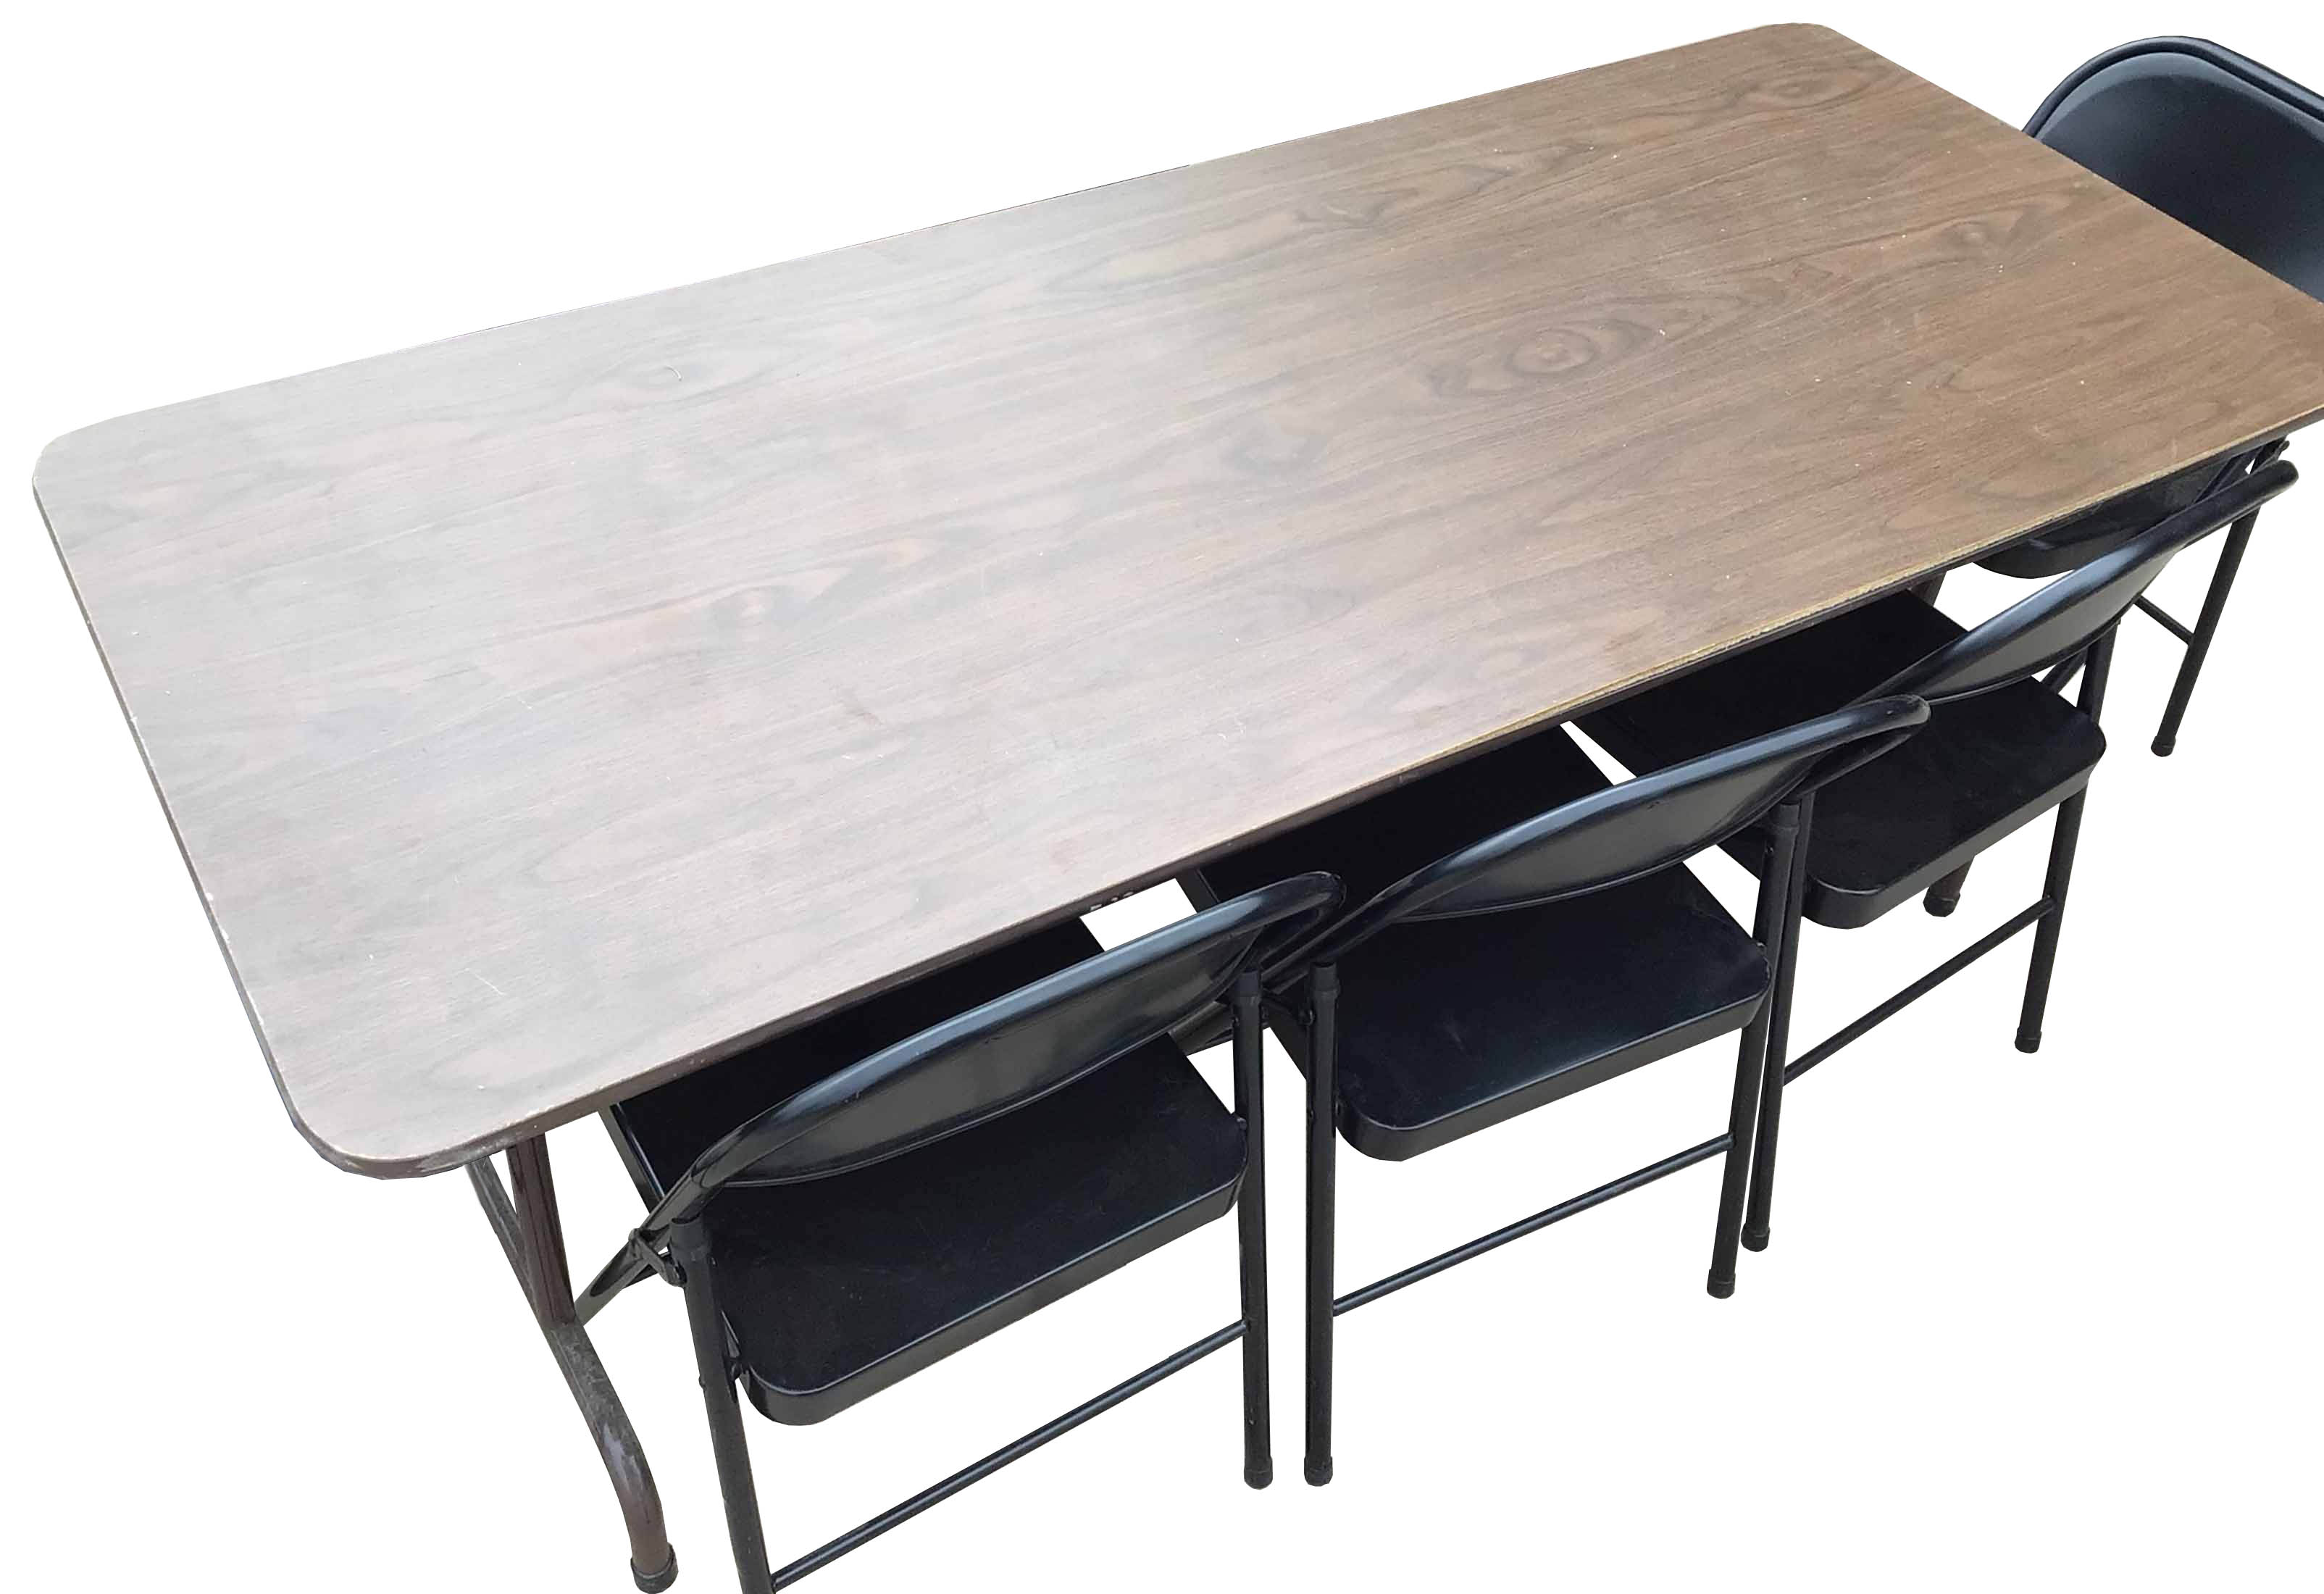 6 foot non-bifold rectangle table